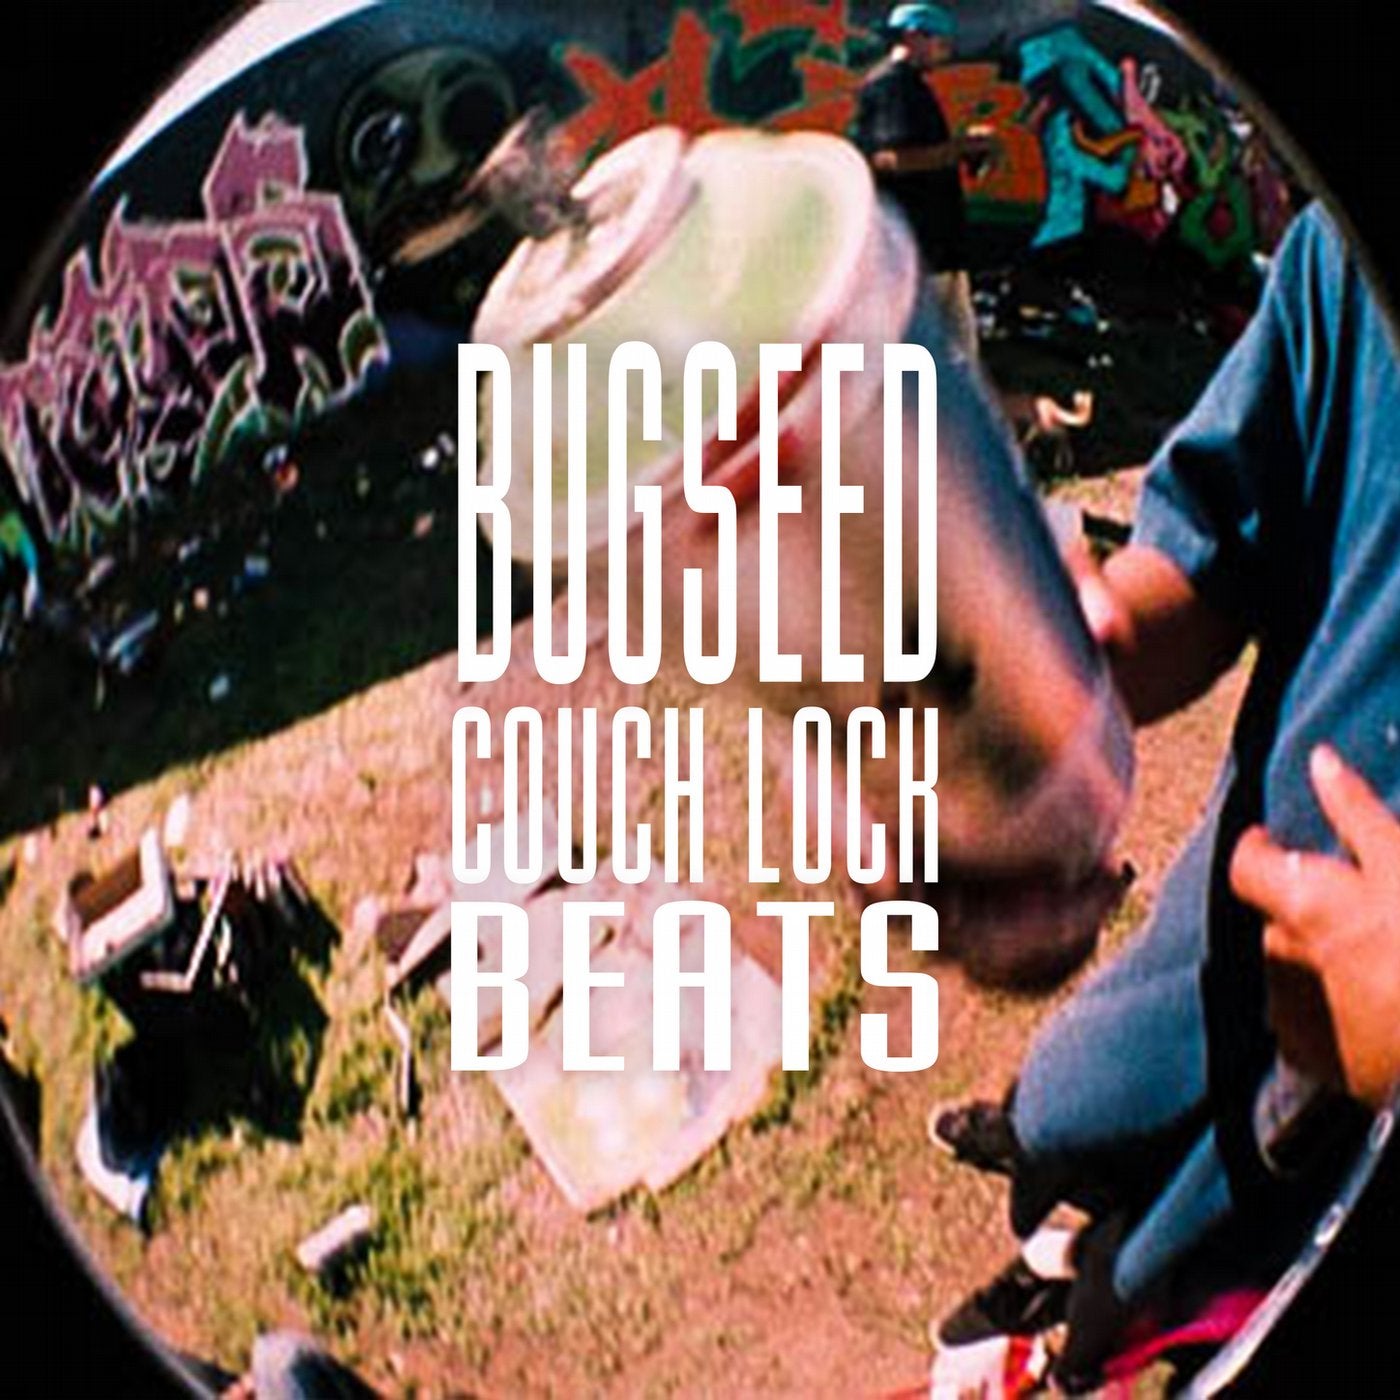 Couch Lock Beats